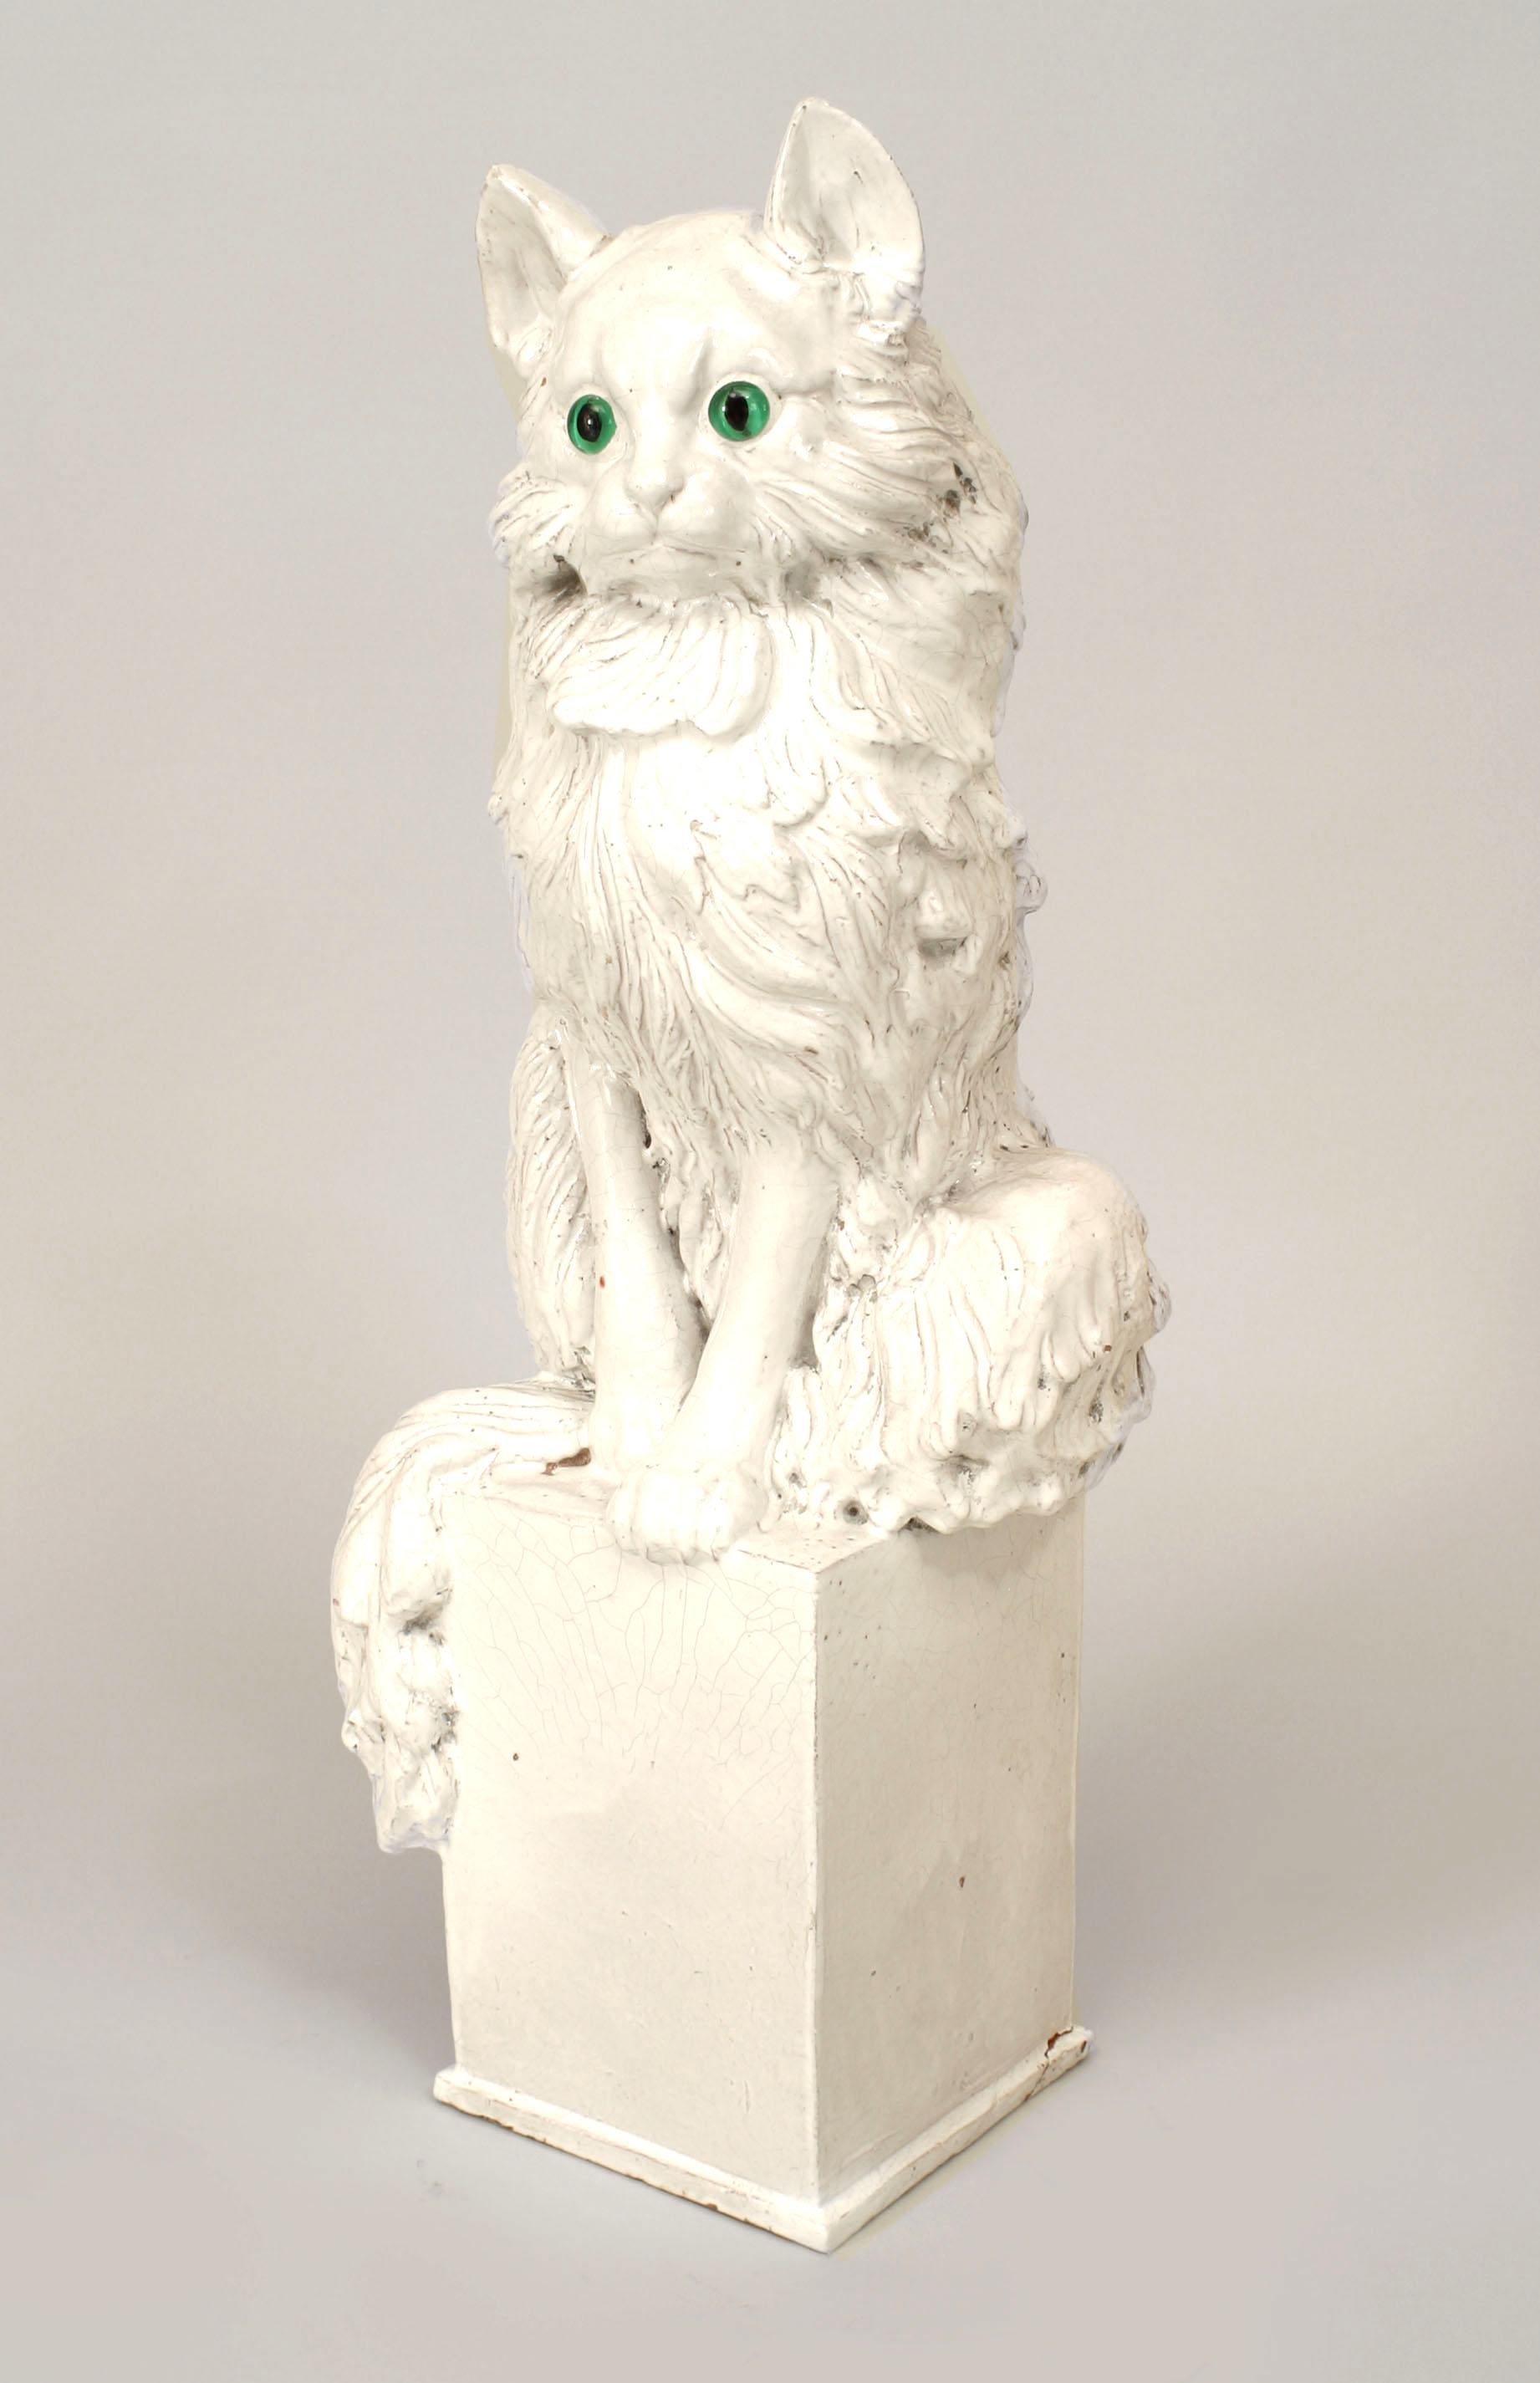 Italian 1950s white ceramic figure of a life size seated cat with green eyes perched on a square pedestal base
